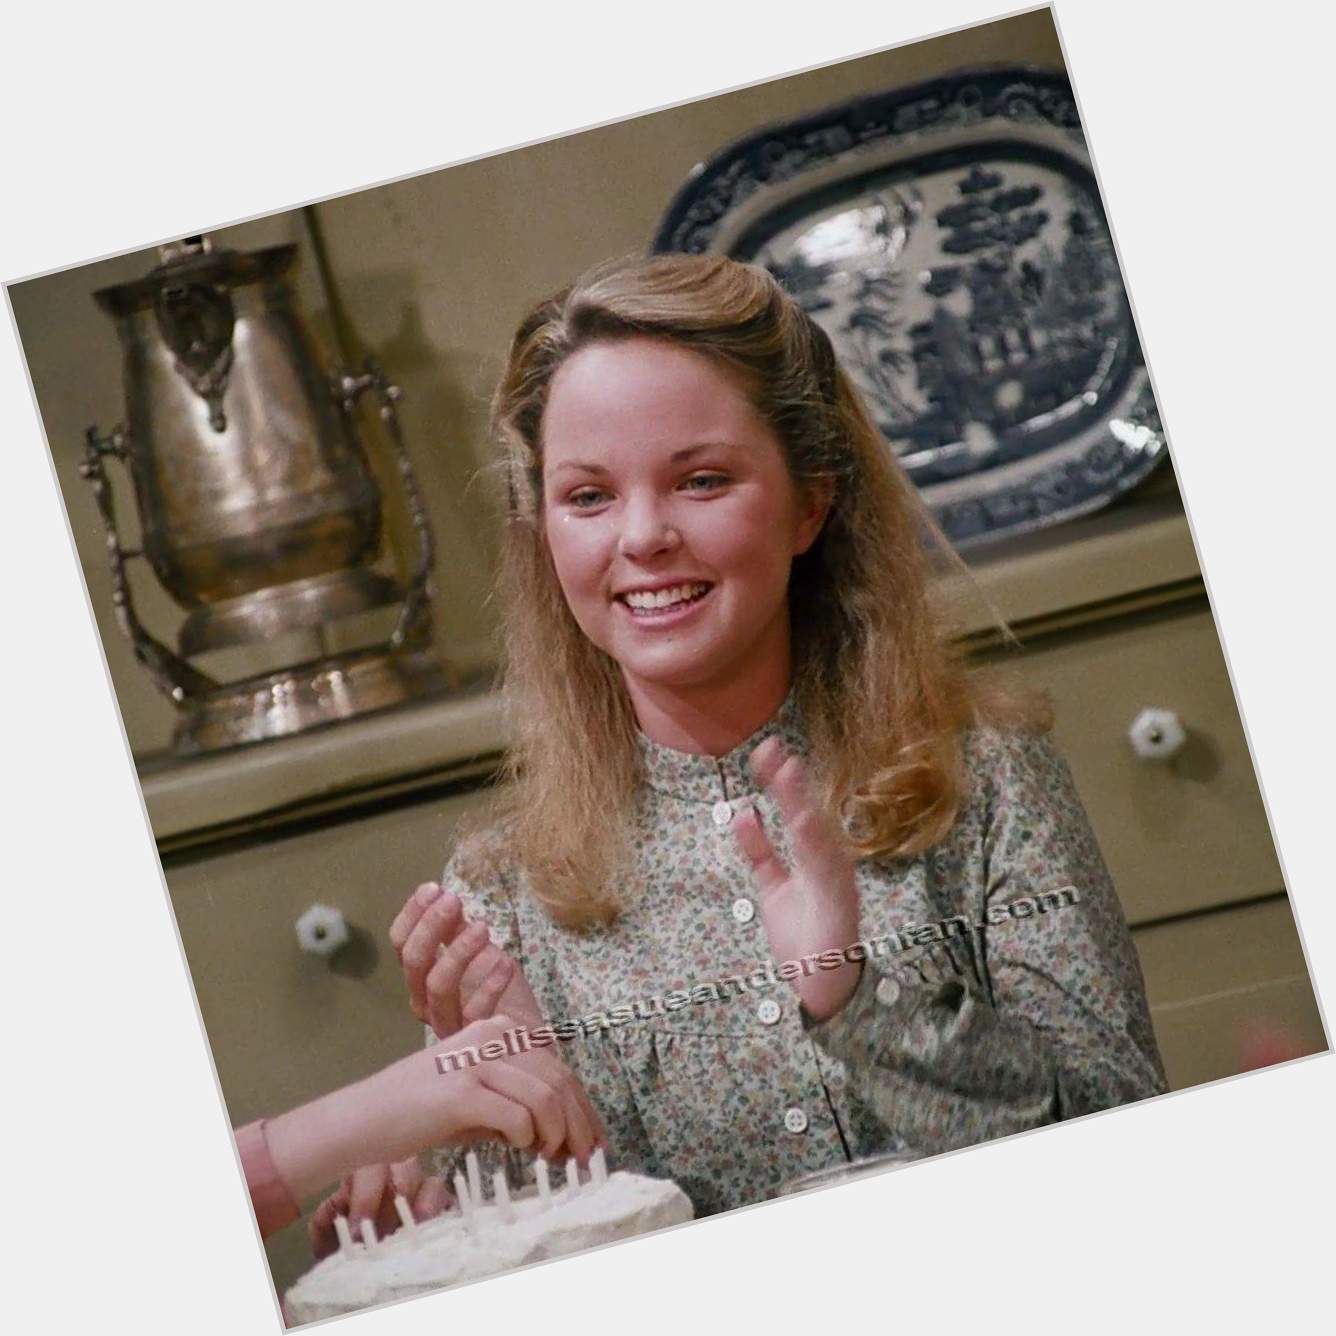 Happy Birthday Melissa Sue Anderson.....Little house on the praire...sweet memories!! 